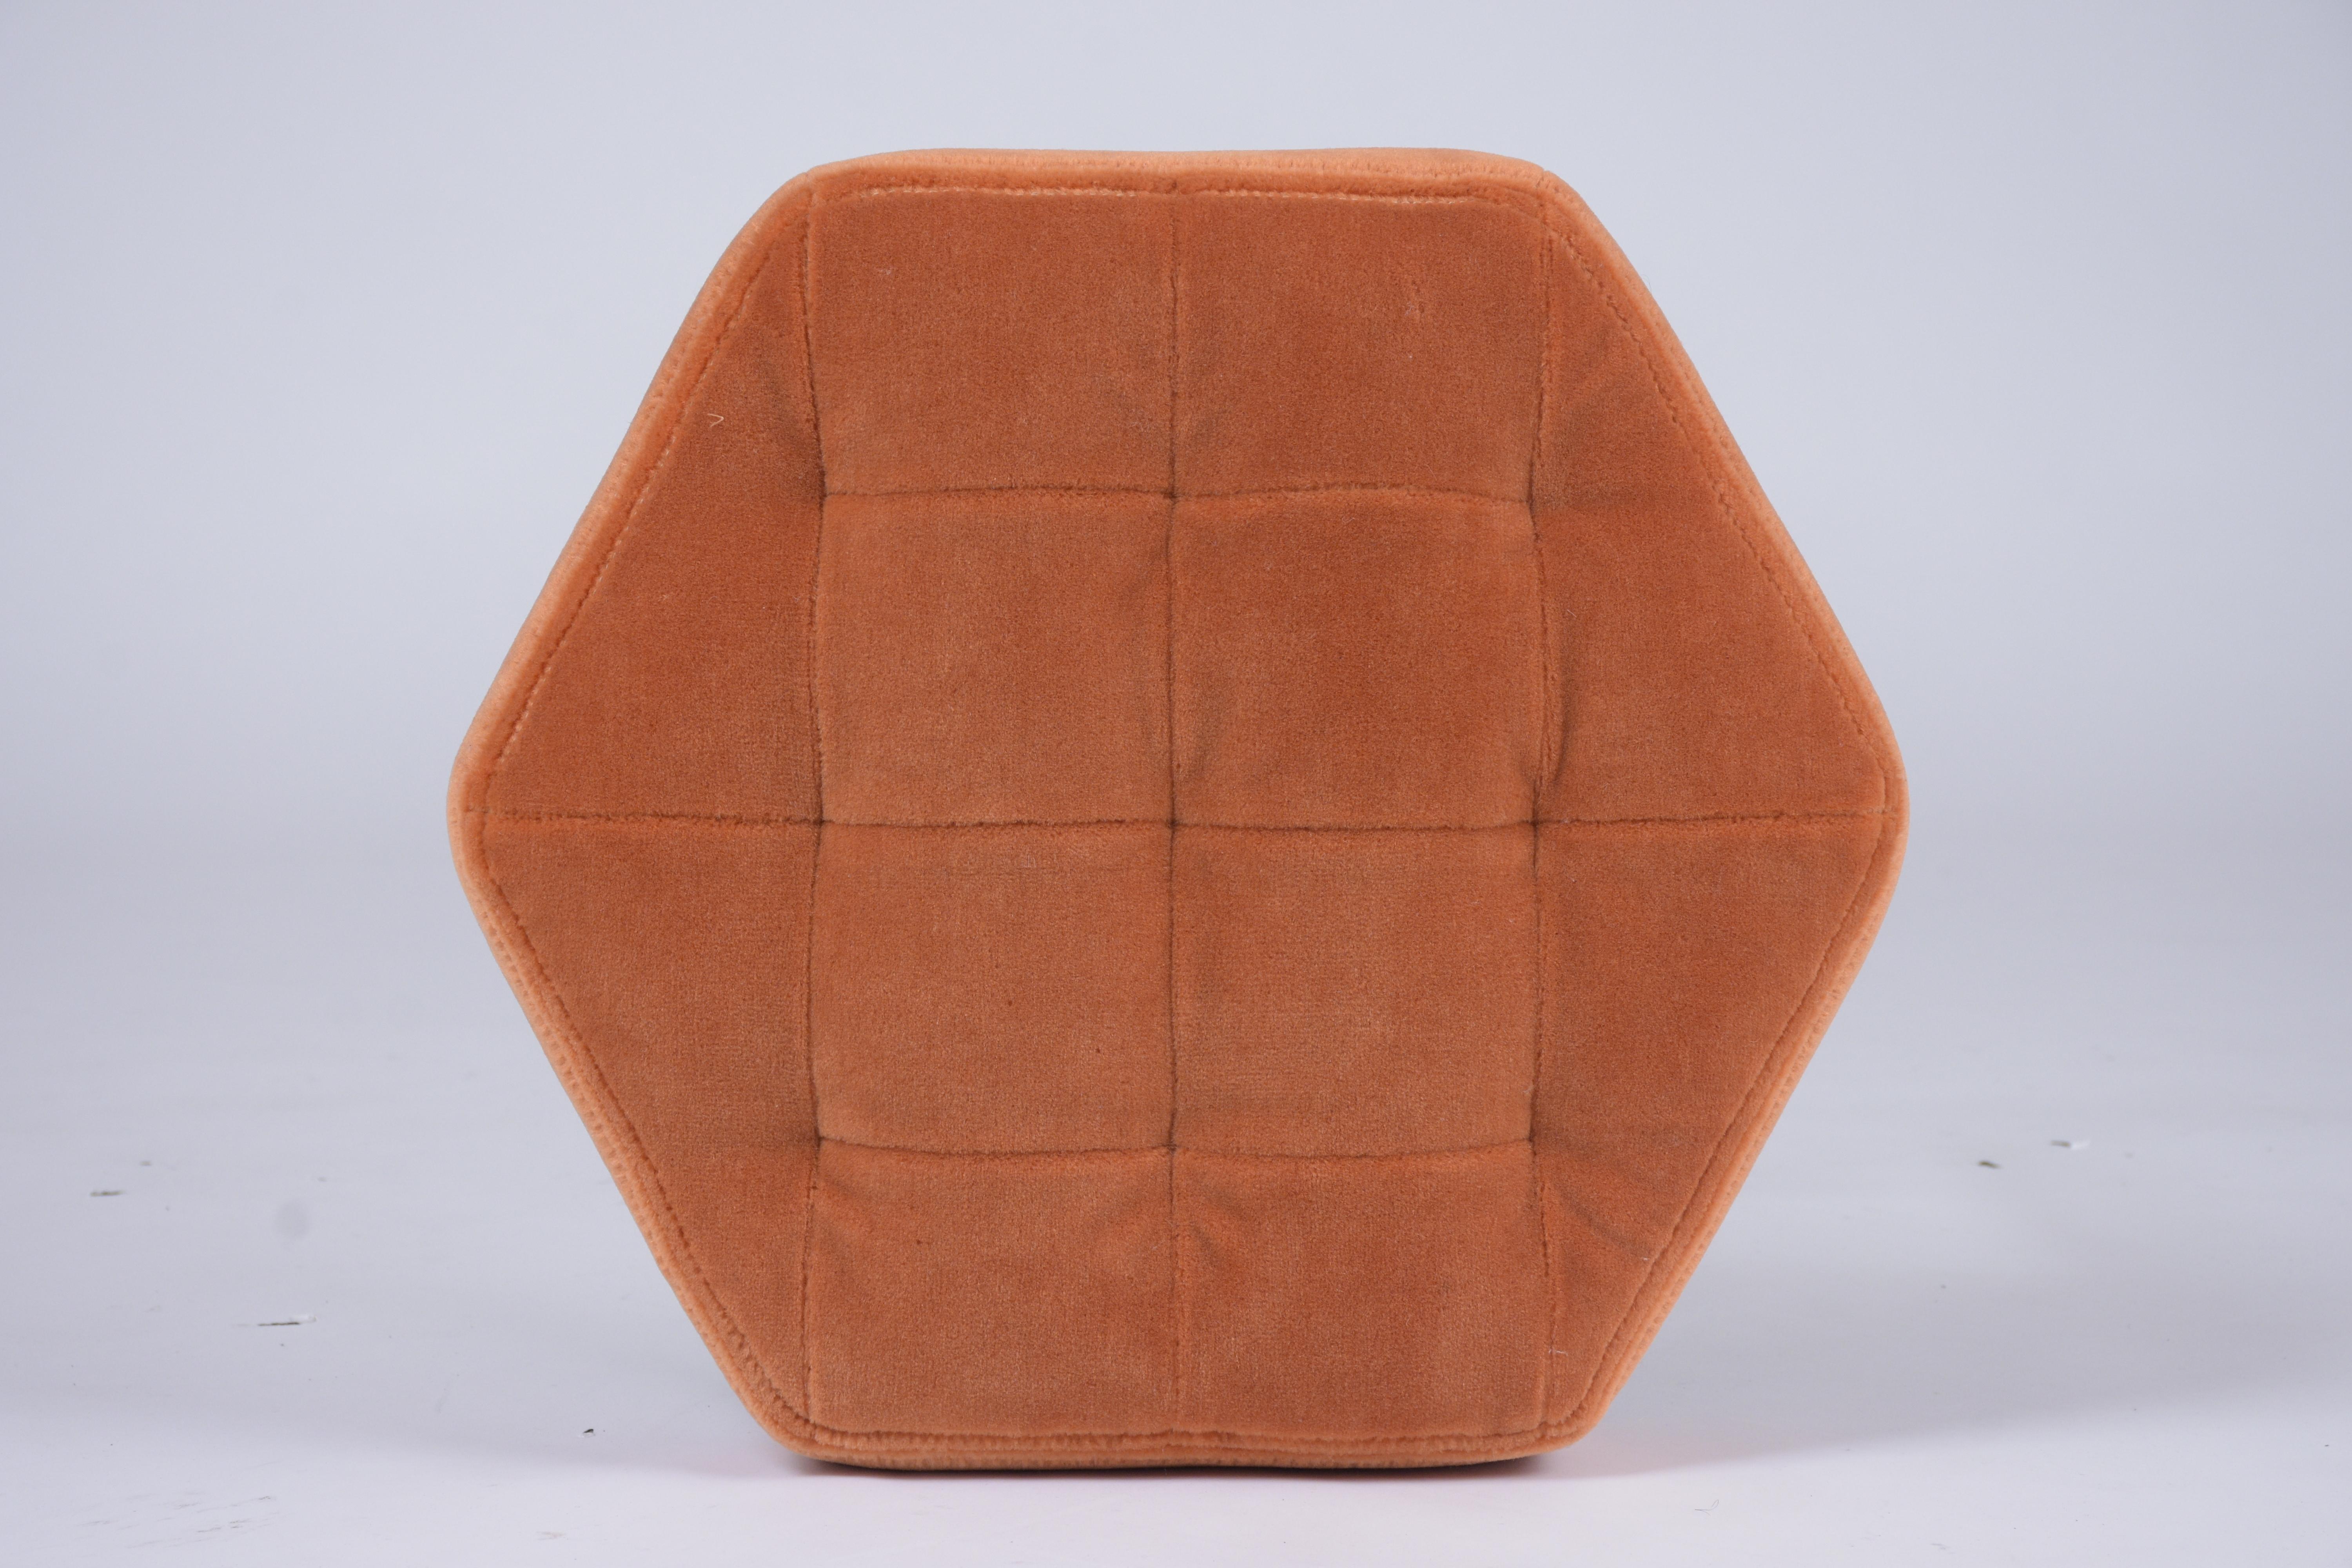 This vintage 1970s tufted stool is in great condition, has a solid brass frame and has been newly upholstered in an orange velvet mohair fabric. The stool features a new tufted upholstered hexagon seat cushion with topstitch and single piping